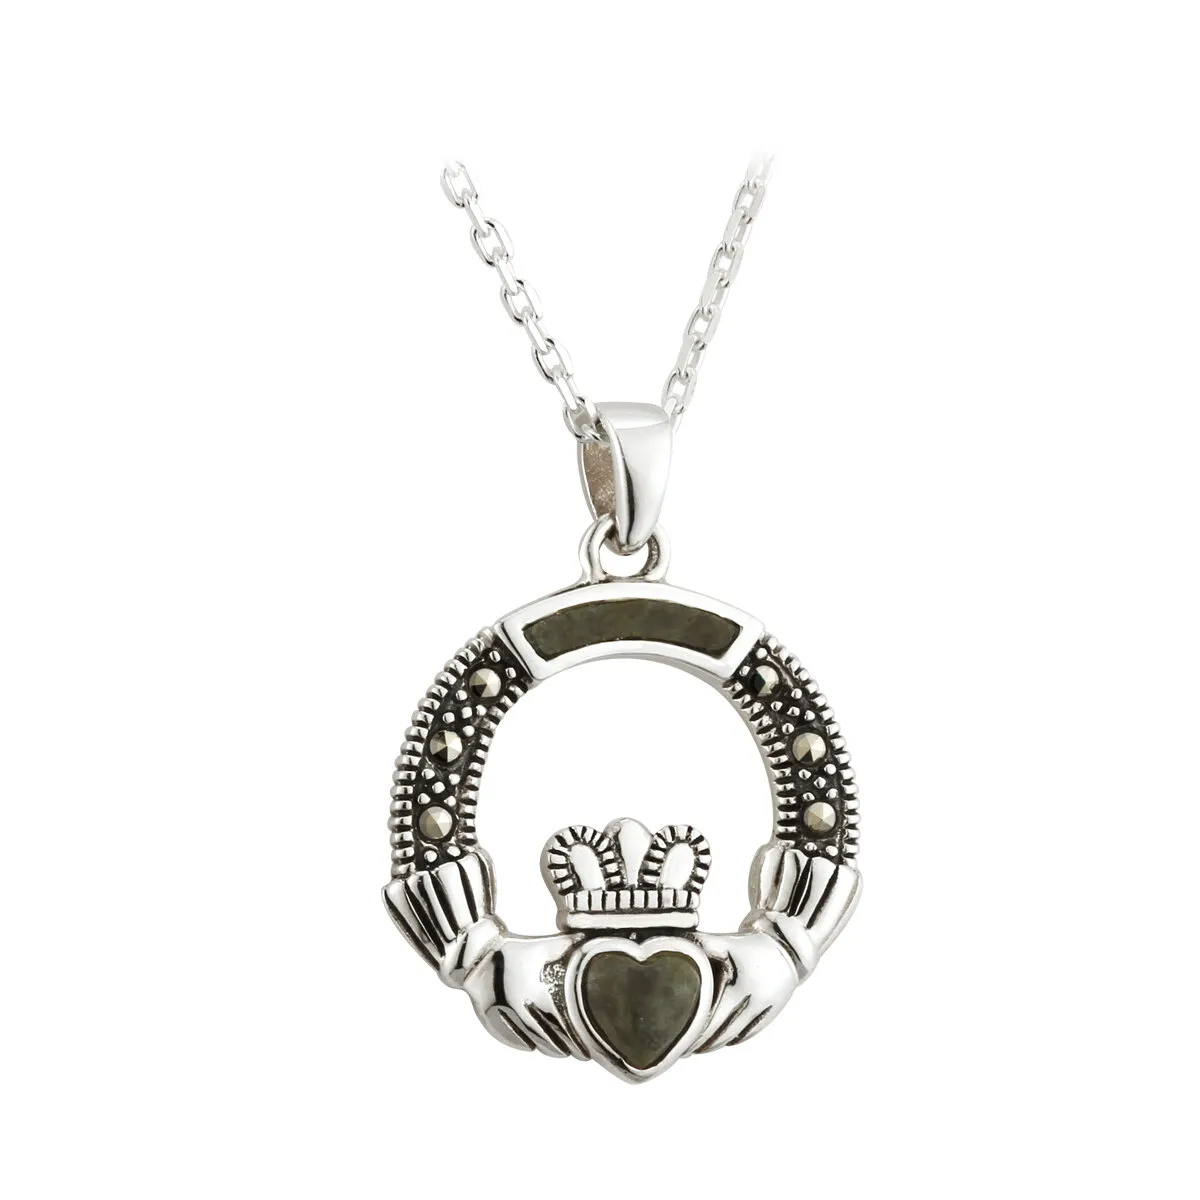 Connemara Marble & Marcasite Claddagh Pendant in Sterling Silver...